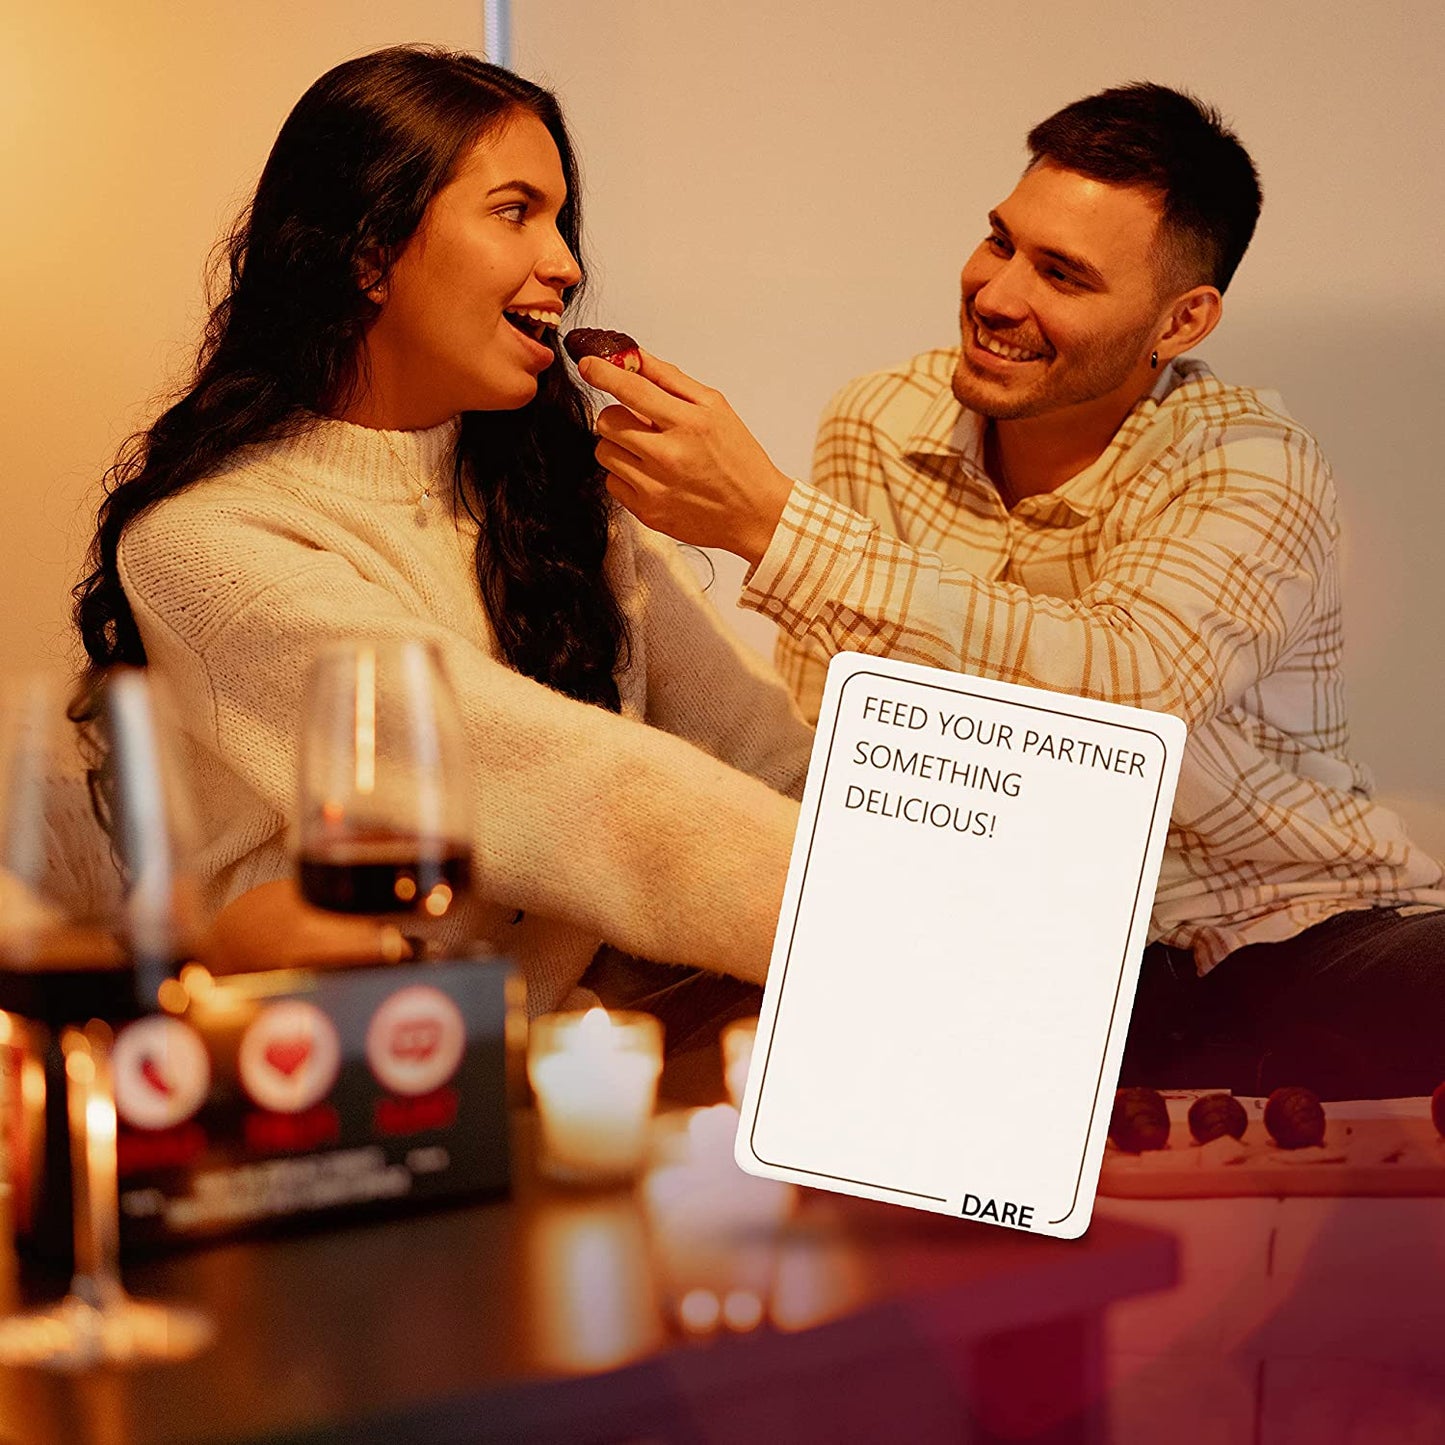 Talk, Flirt, Dare! Fun and Romantic Game for Couples: Conversation Starters, Flirty Games and Cool Dares!